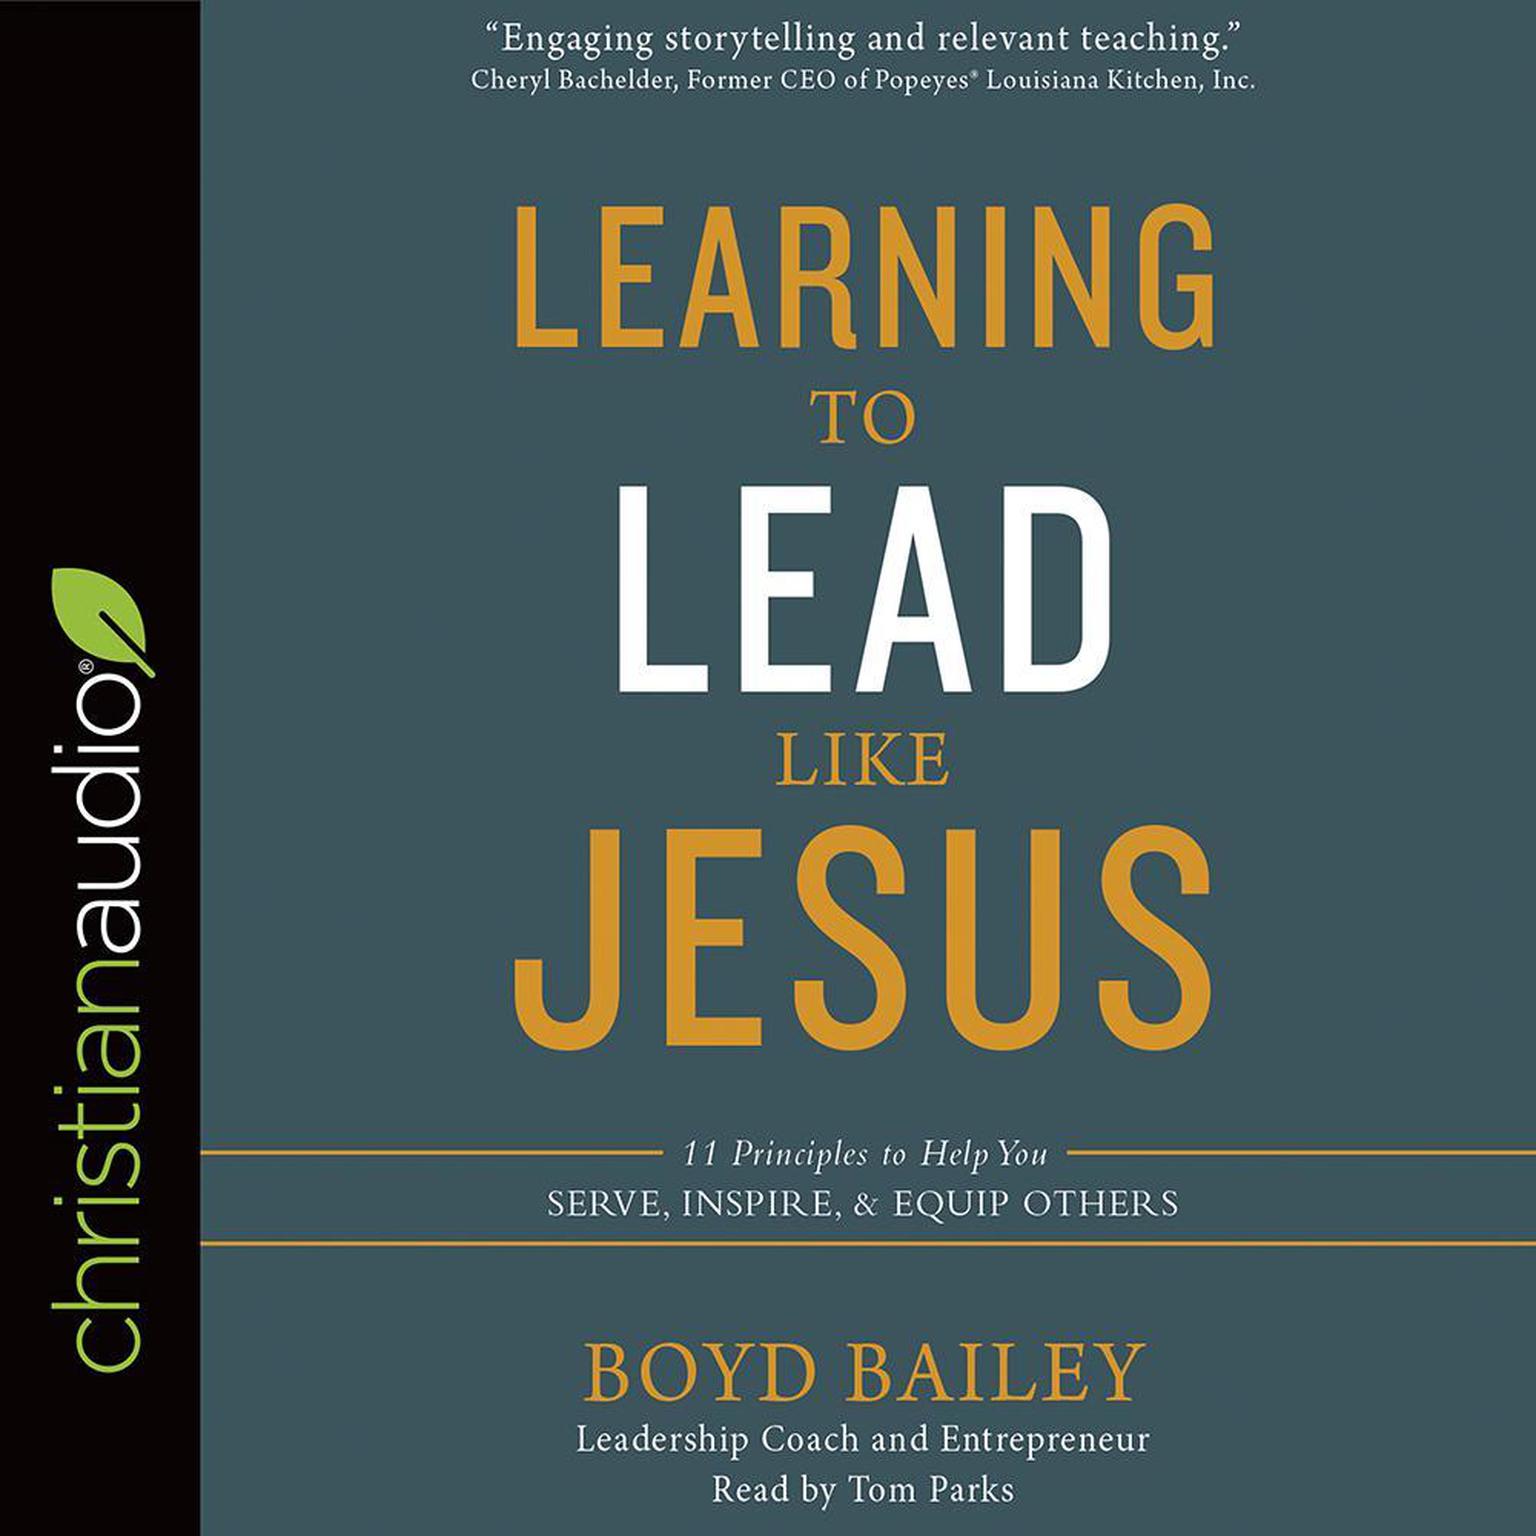 Learning to Lead Like Jesus: 11 Principles to Help You Serve, Inspire, and Equip Others Audiobook, by Boyd Bailey